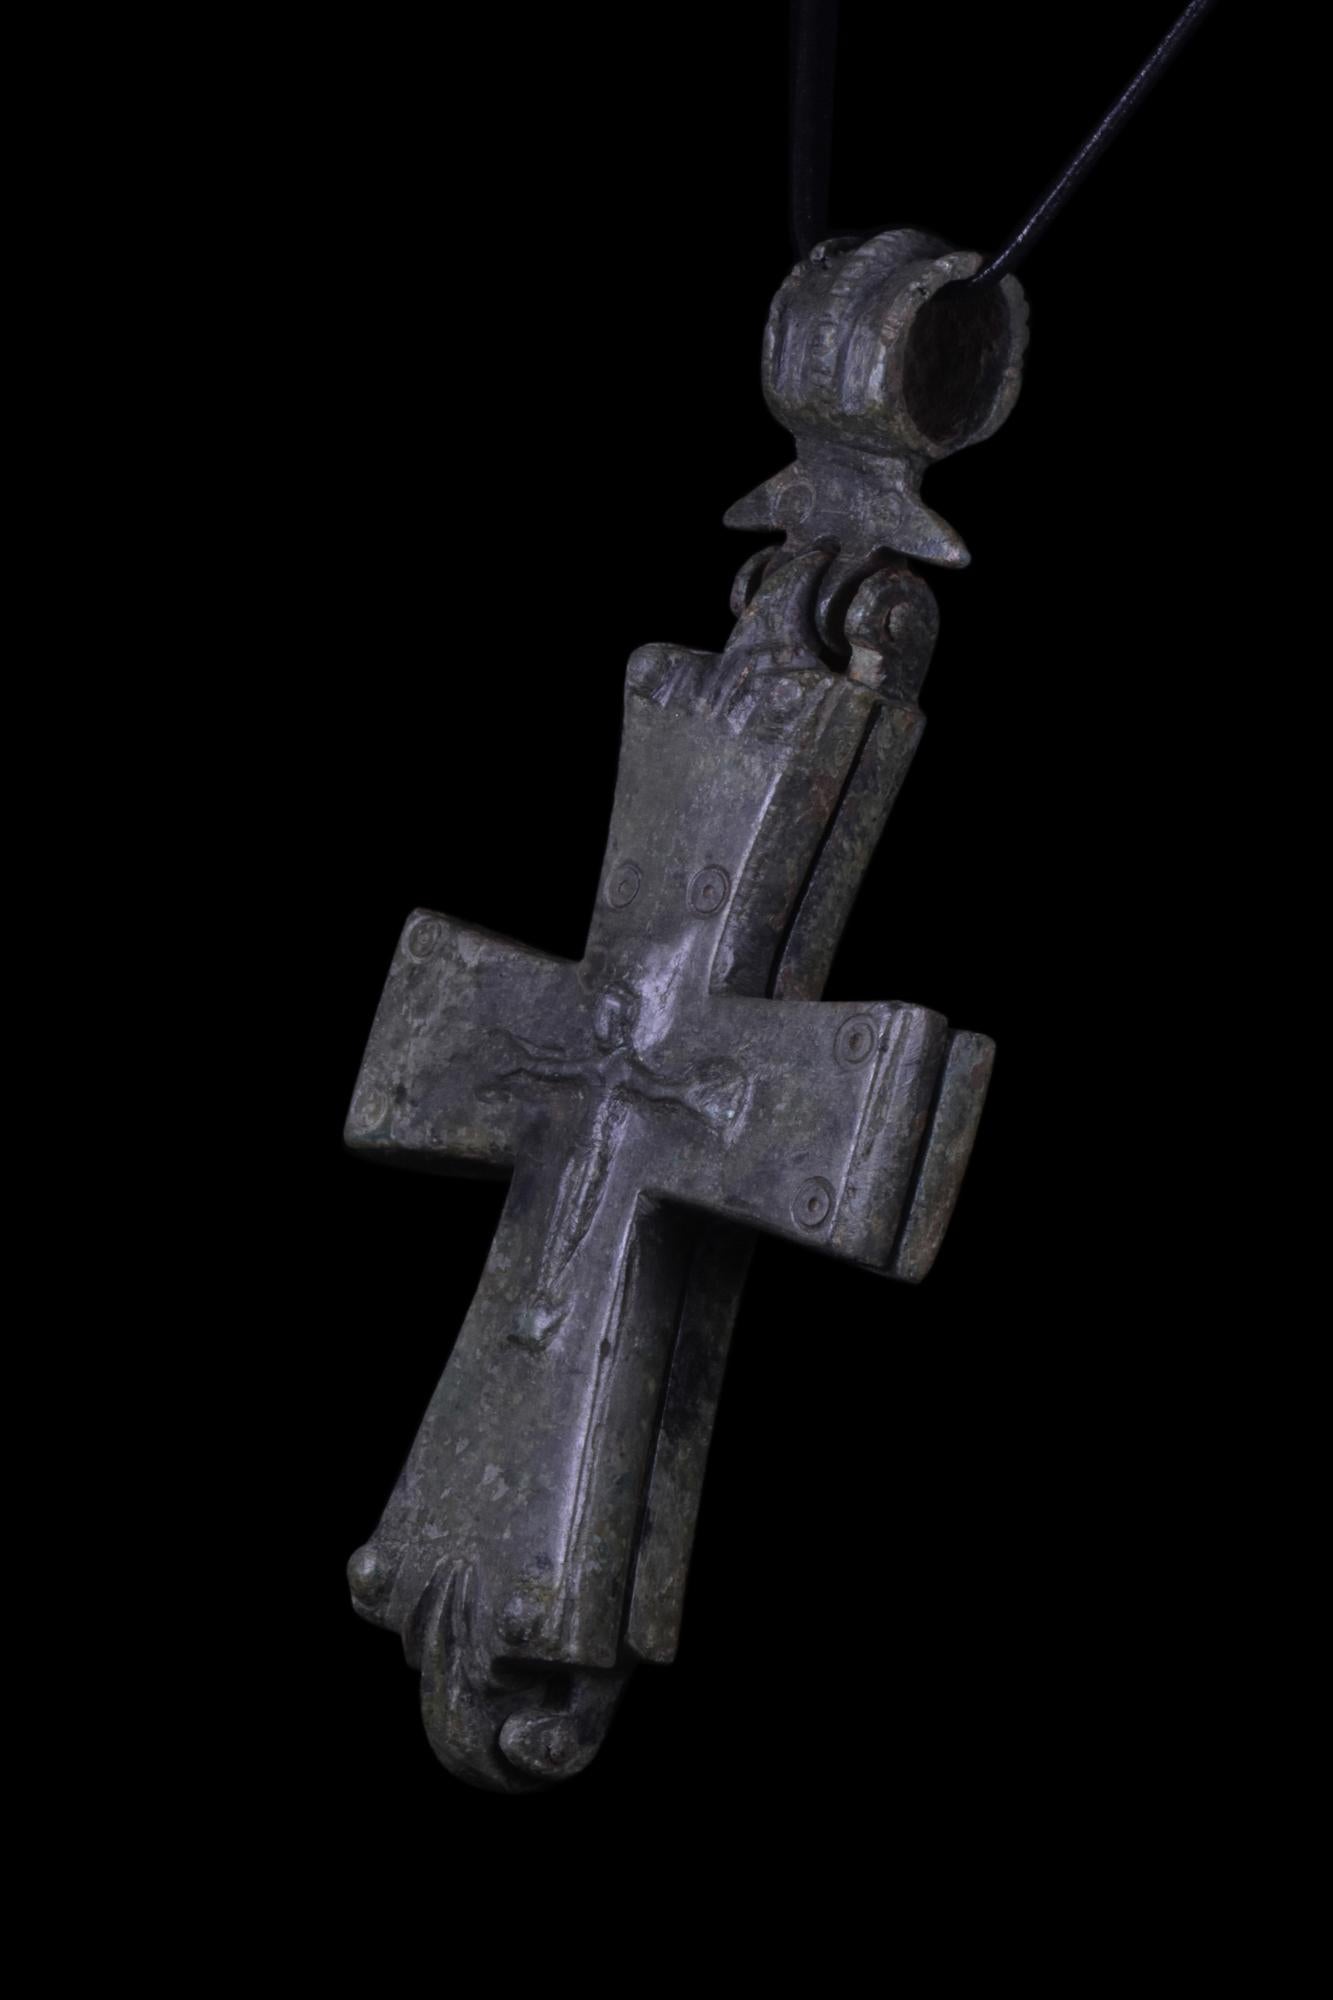 A cast-bronze Byzantine reliquary cross pendant with two cruciform plaques that open for relic or document storage, depicting the crucified Christ on both faces. Relics, the physical remains of a holy site or holy person, or objects with which they